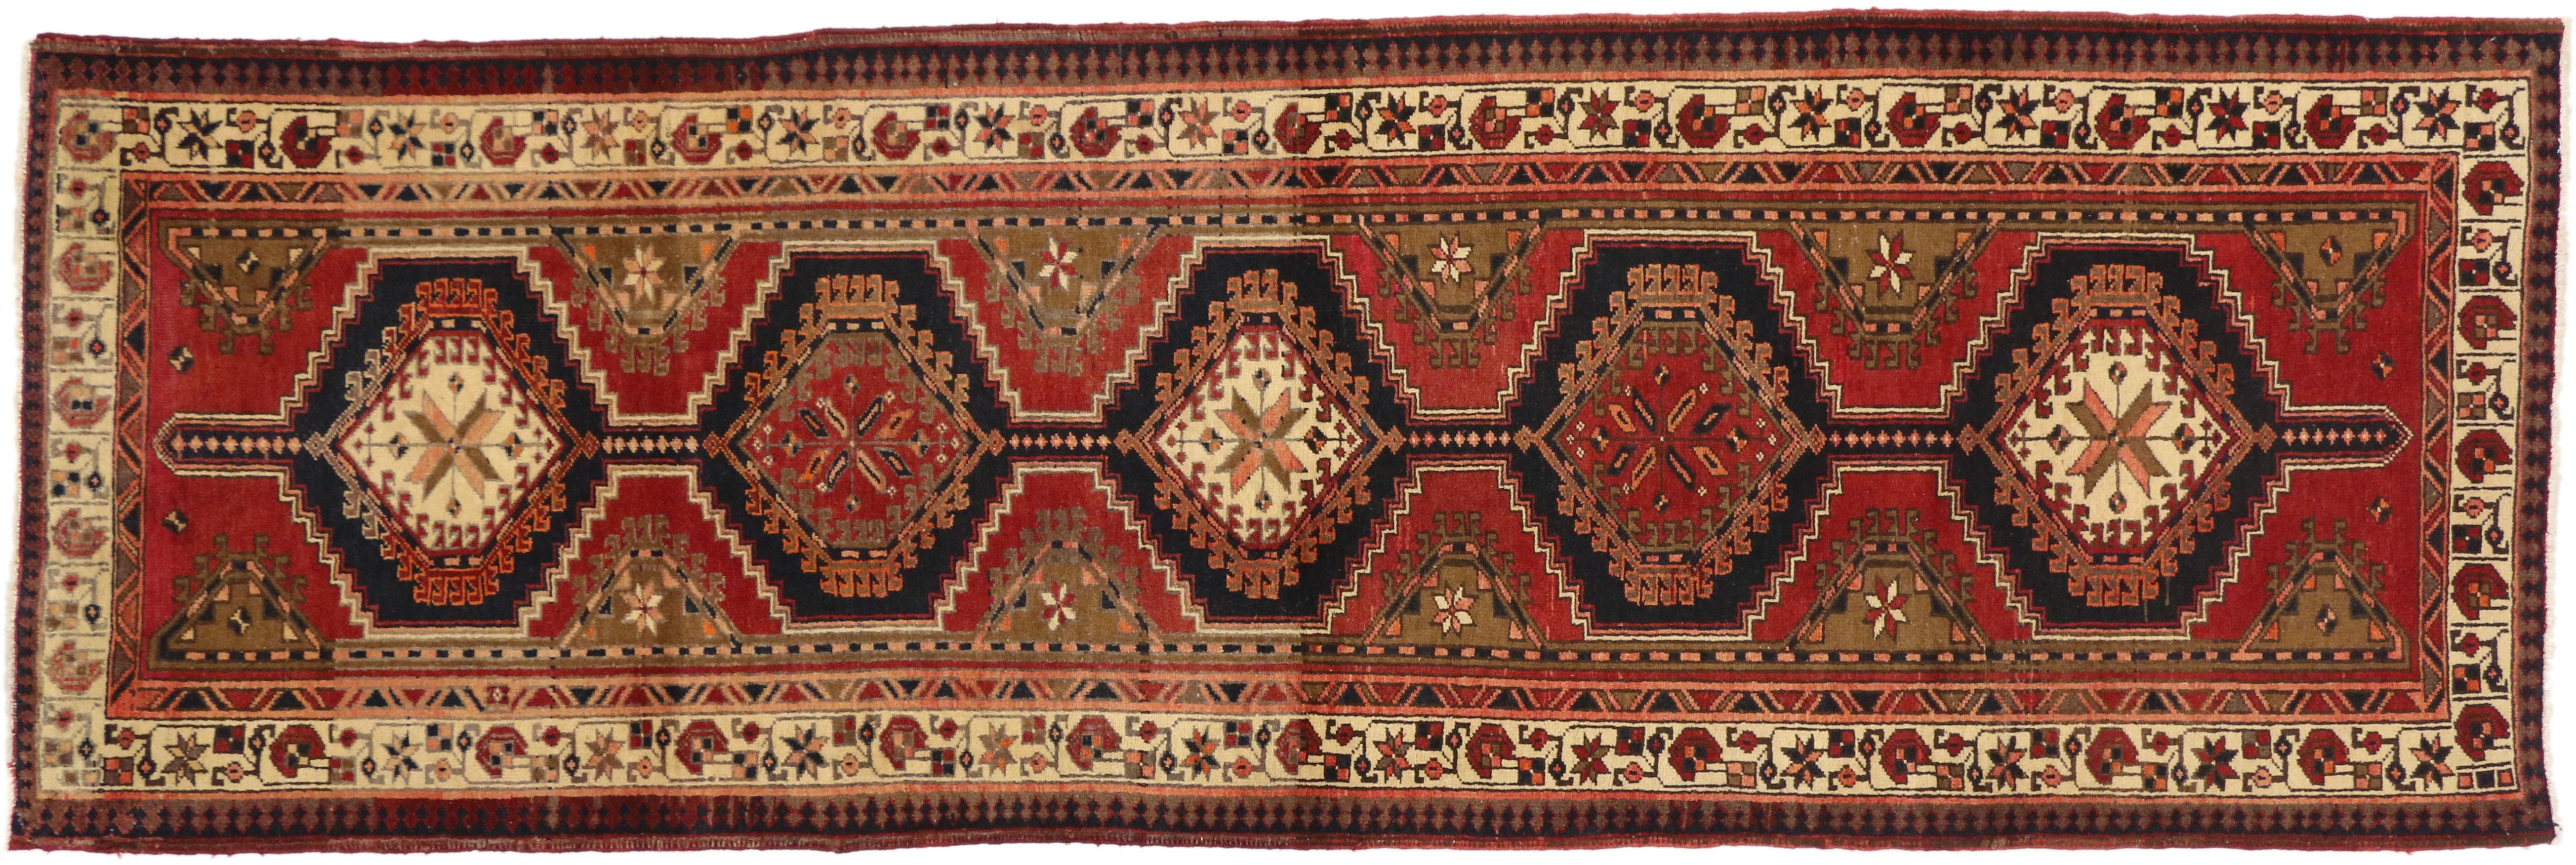 75372, Nomadic style vintage Persian Azerbaijan Tribal runner, hallway runner. Complete with nomadic style, warm and inviting, this hand-knotted wool vintage Persian Azerbaijan runner features five connected latch-hooked hexagonal pole medallions